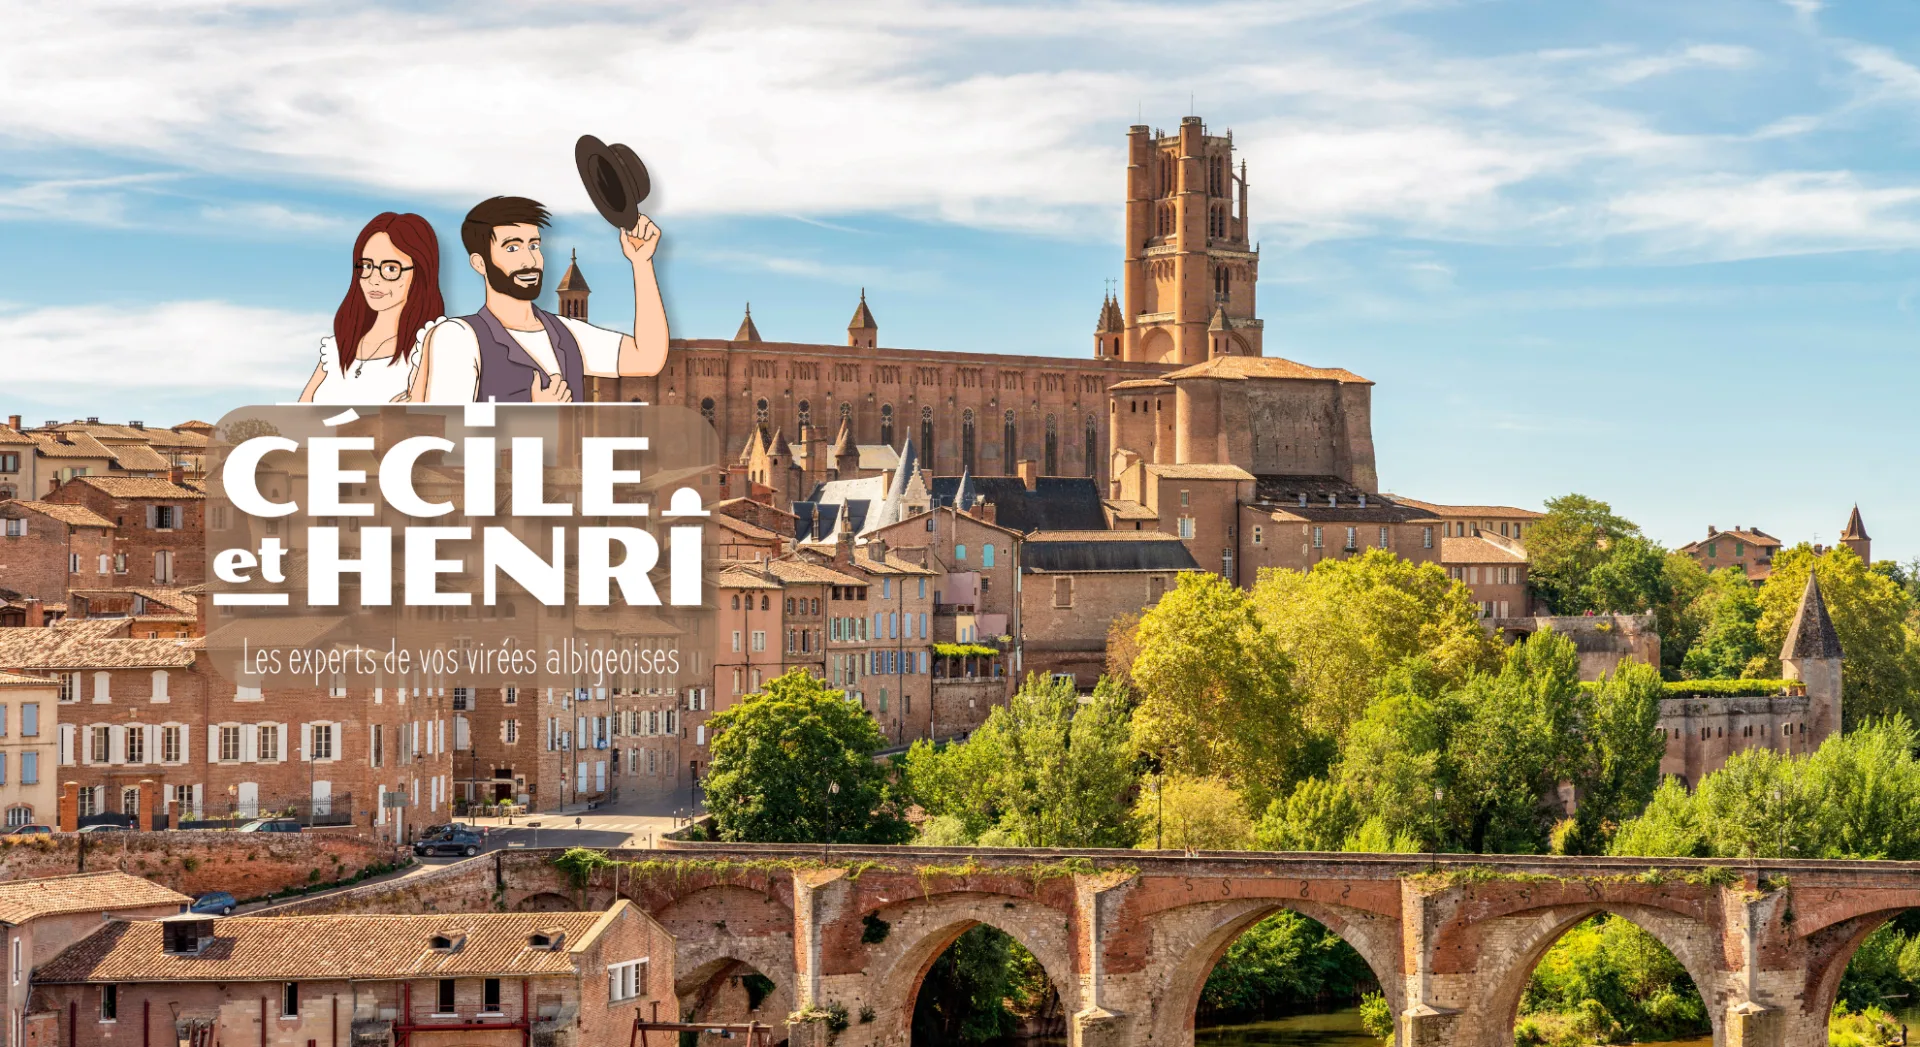 Cécile and Henri's trips - Albi weekend ideas